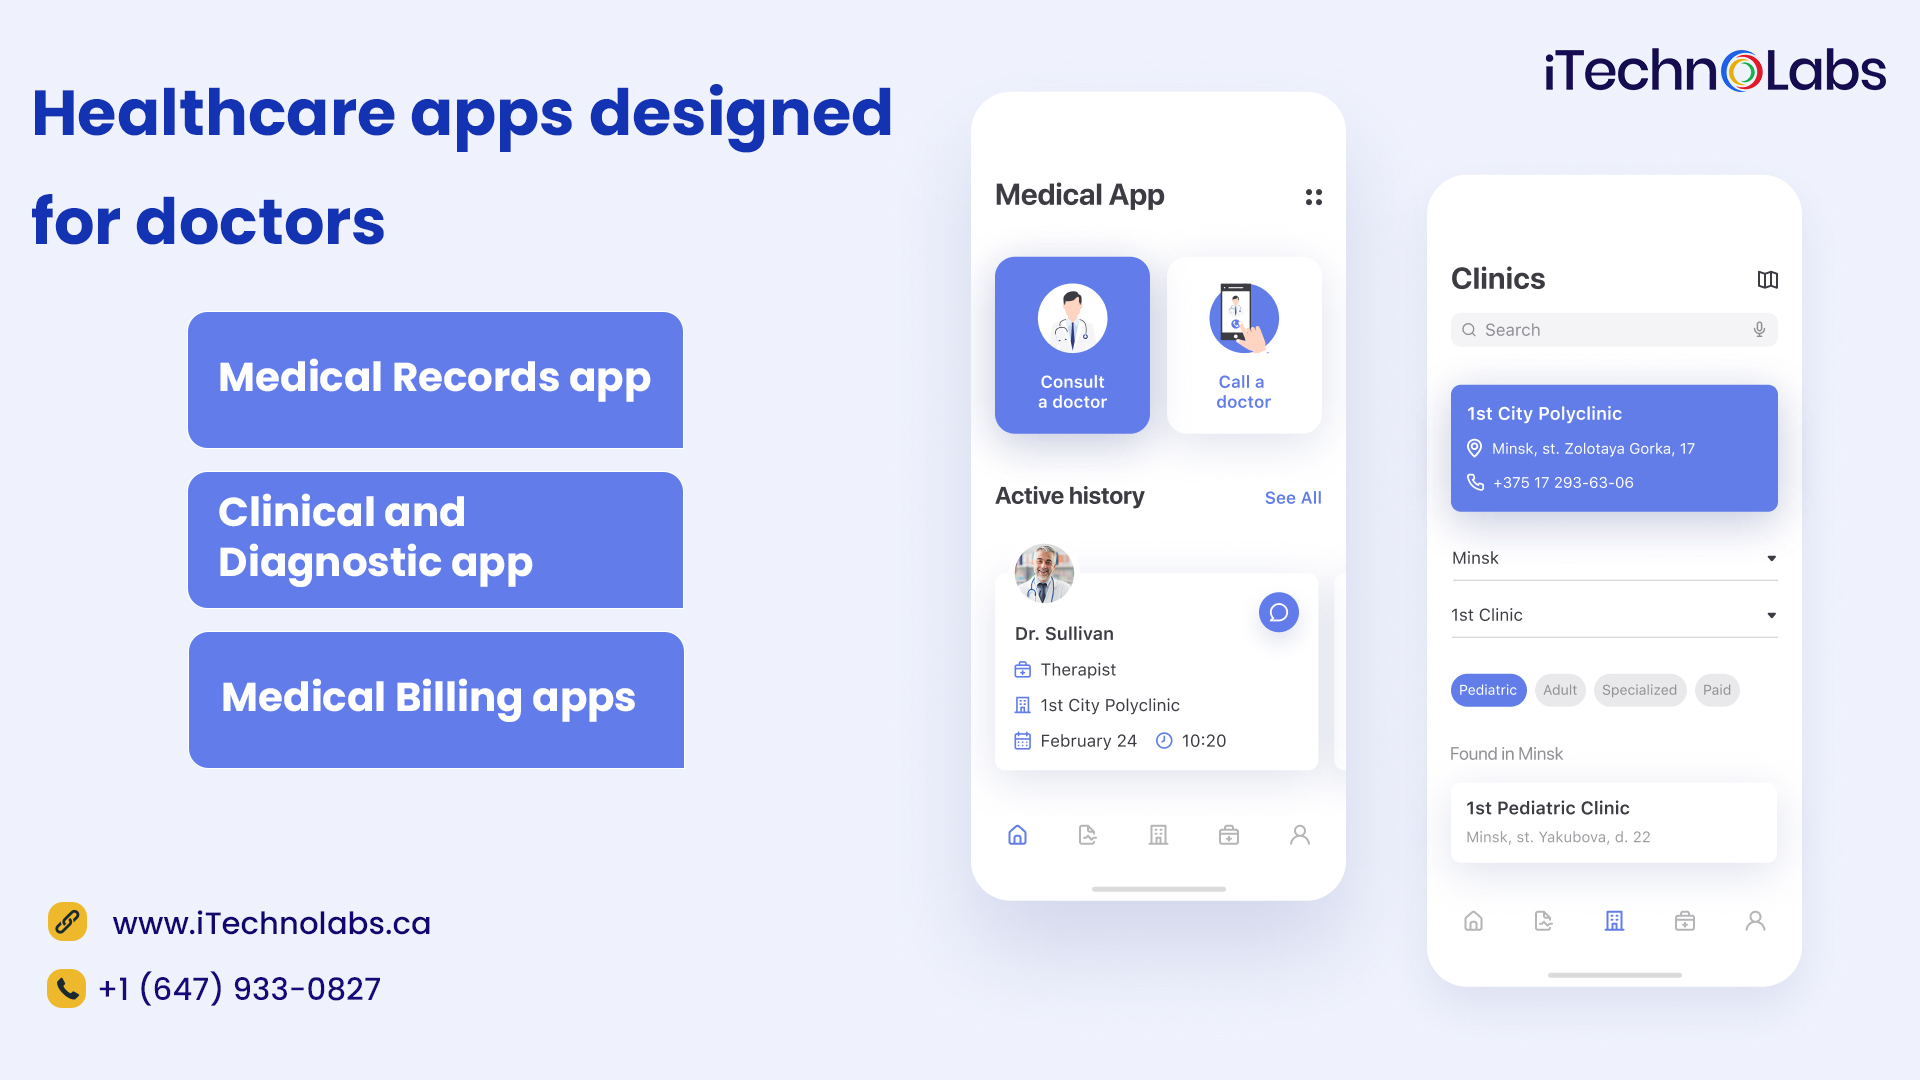 Healthcare-apps-designed-for-doctors-itechnolabs